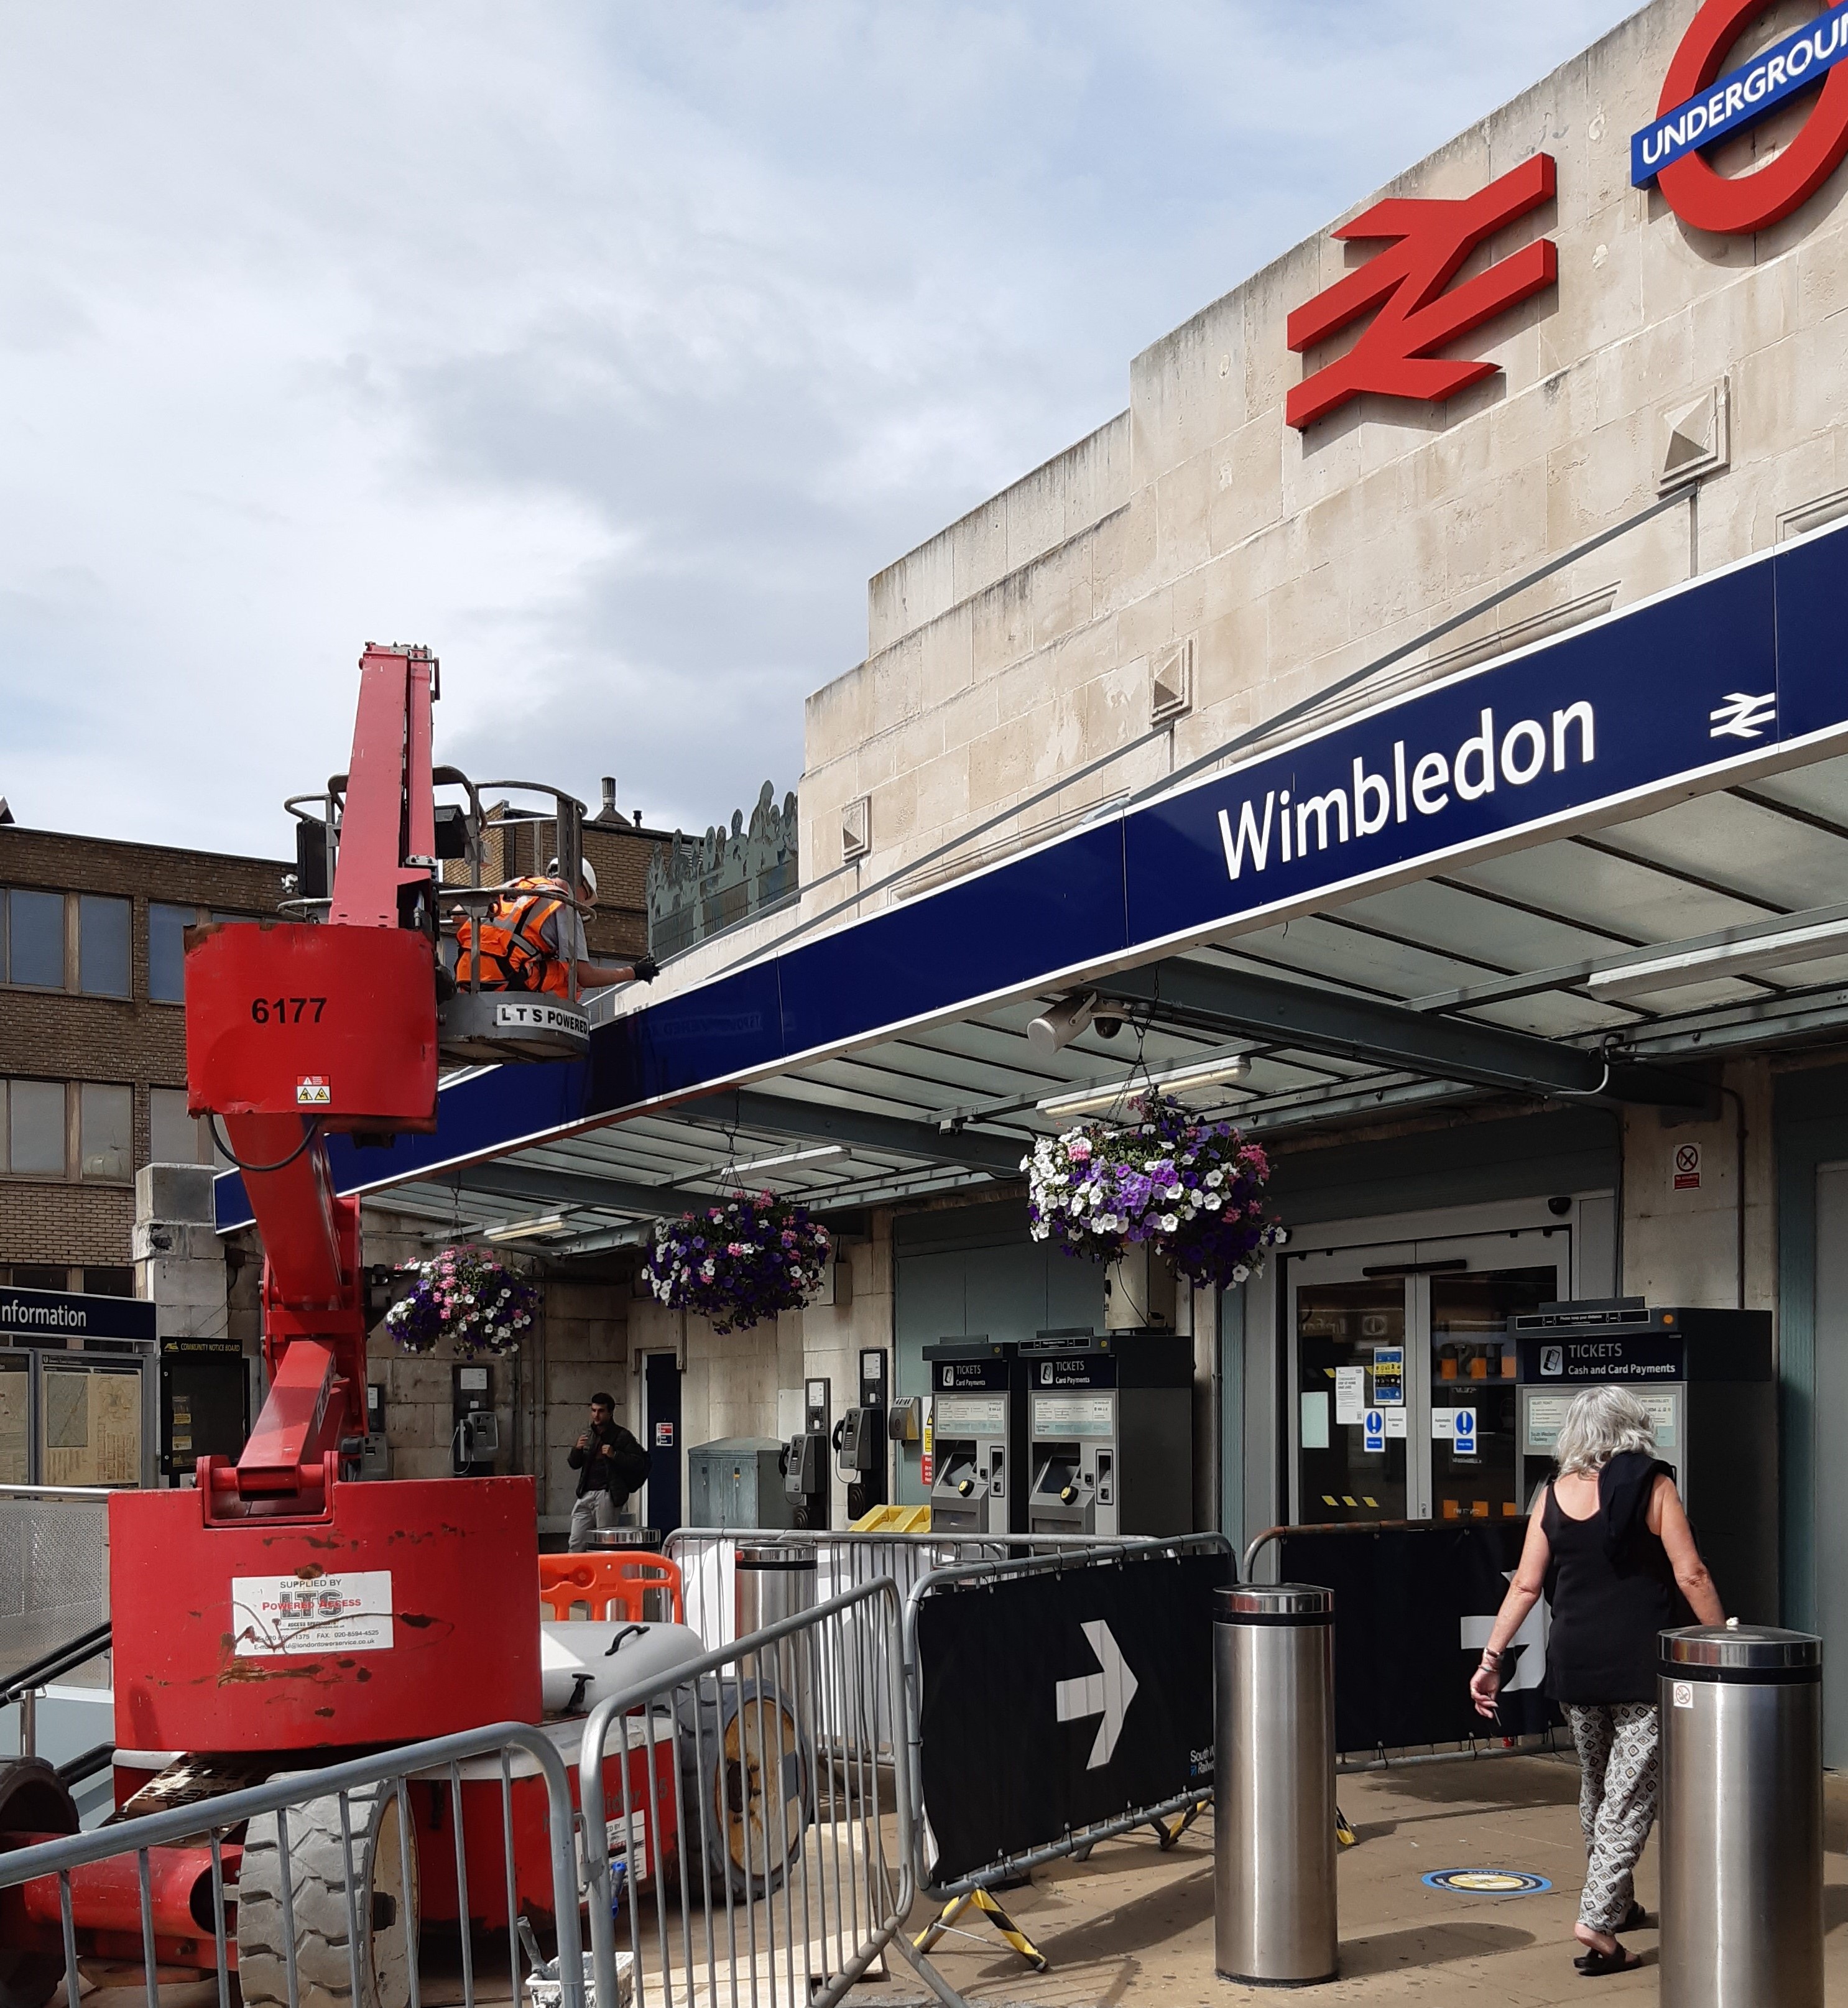 SWR stations set to receive facelift after £1.5 million investment